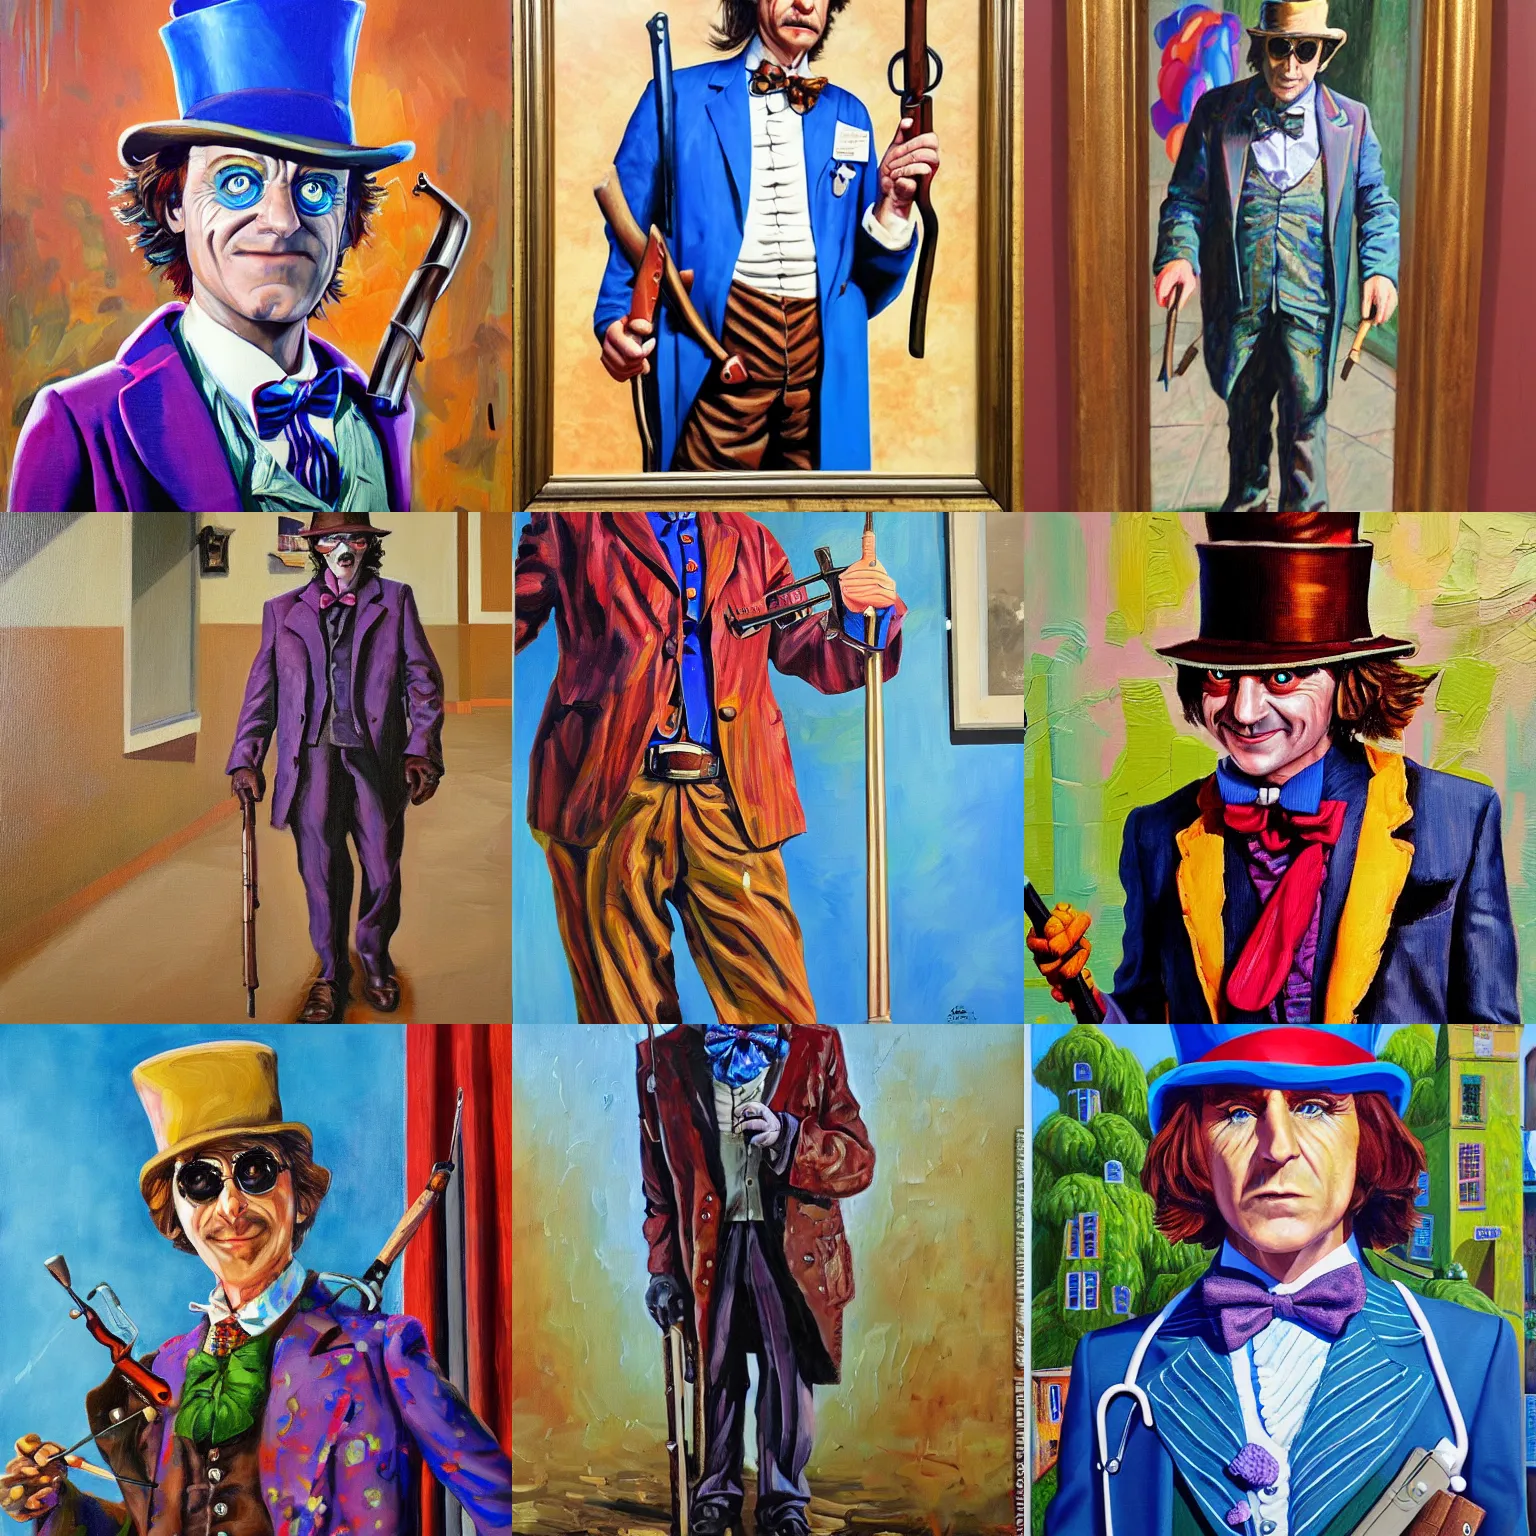 Prompt: Doctor House with an AK 47 walking stick, dressed up as willy wonka, high detail, oil on canvas